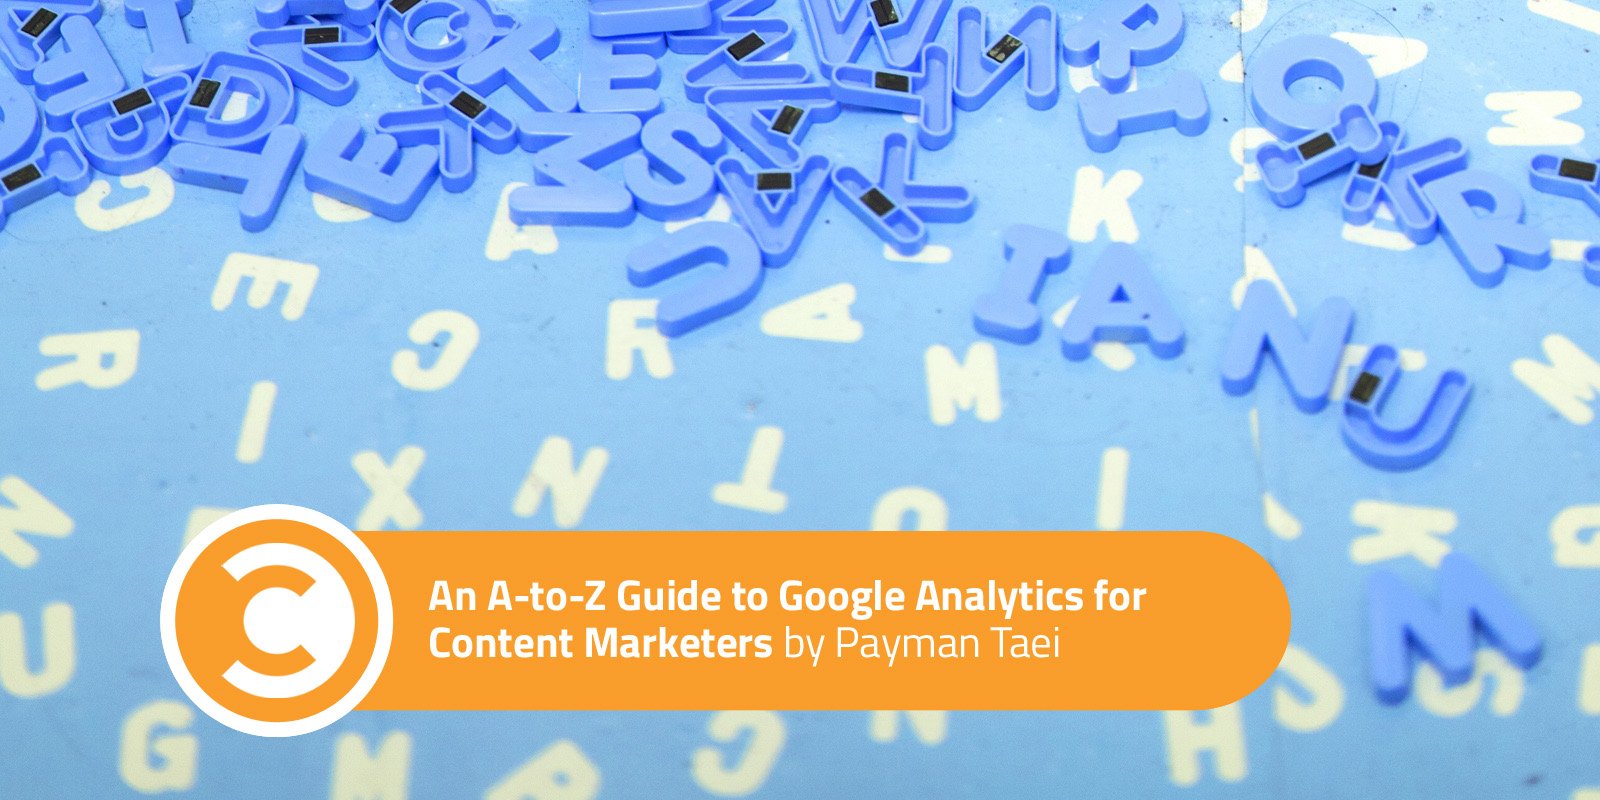 An A-to-Z Guide to Google Analytics for Content Marketers